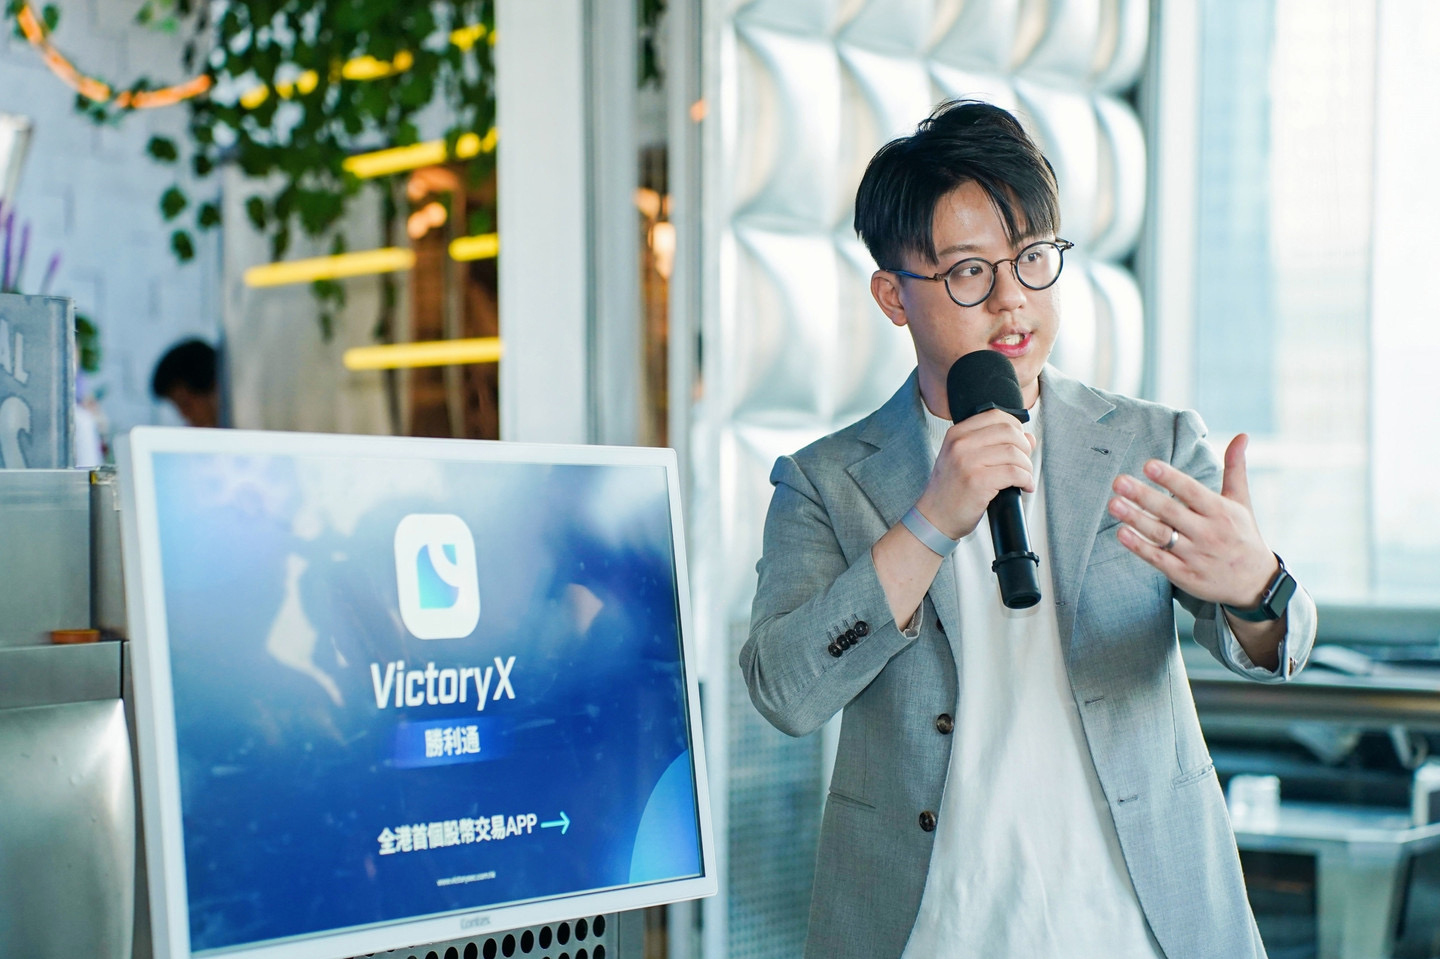 Victory is the first securities & virtual assets trading APP in Hong Kong, Mr. Kennix Chan the Executive Director of Victory Securities, said that he spent over 10 million HKD to develop the APP.